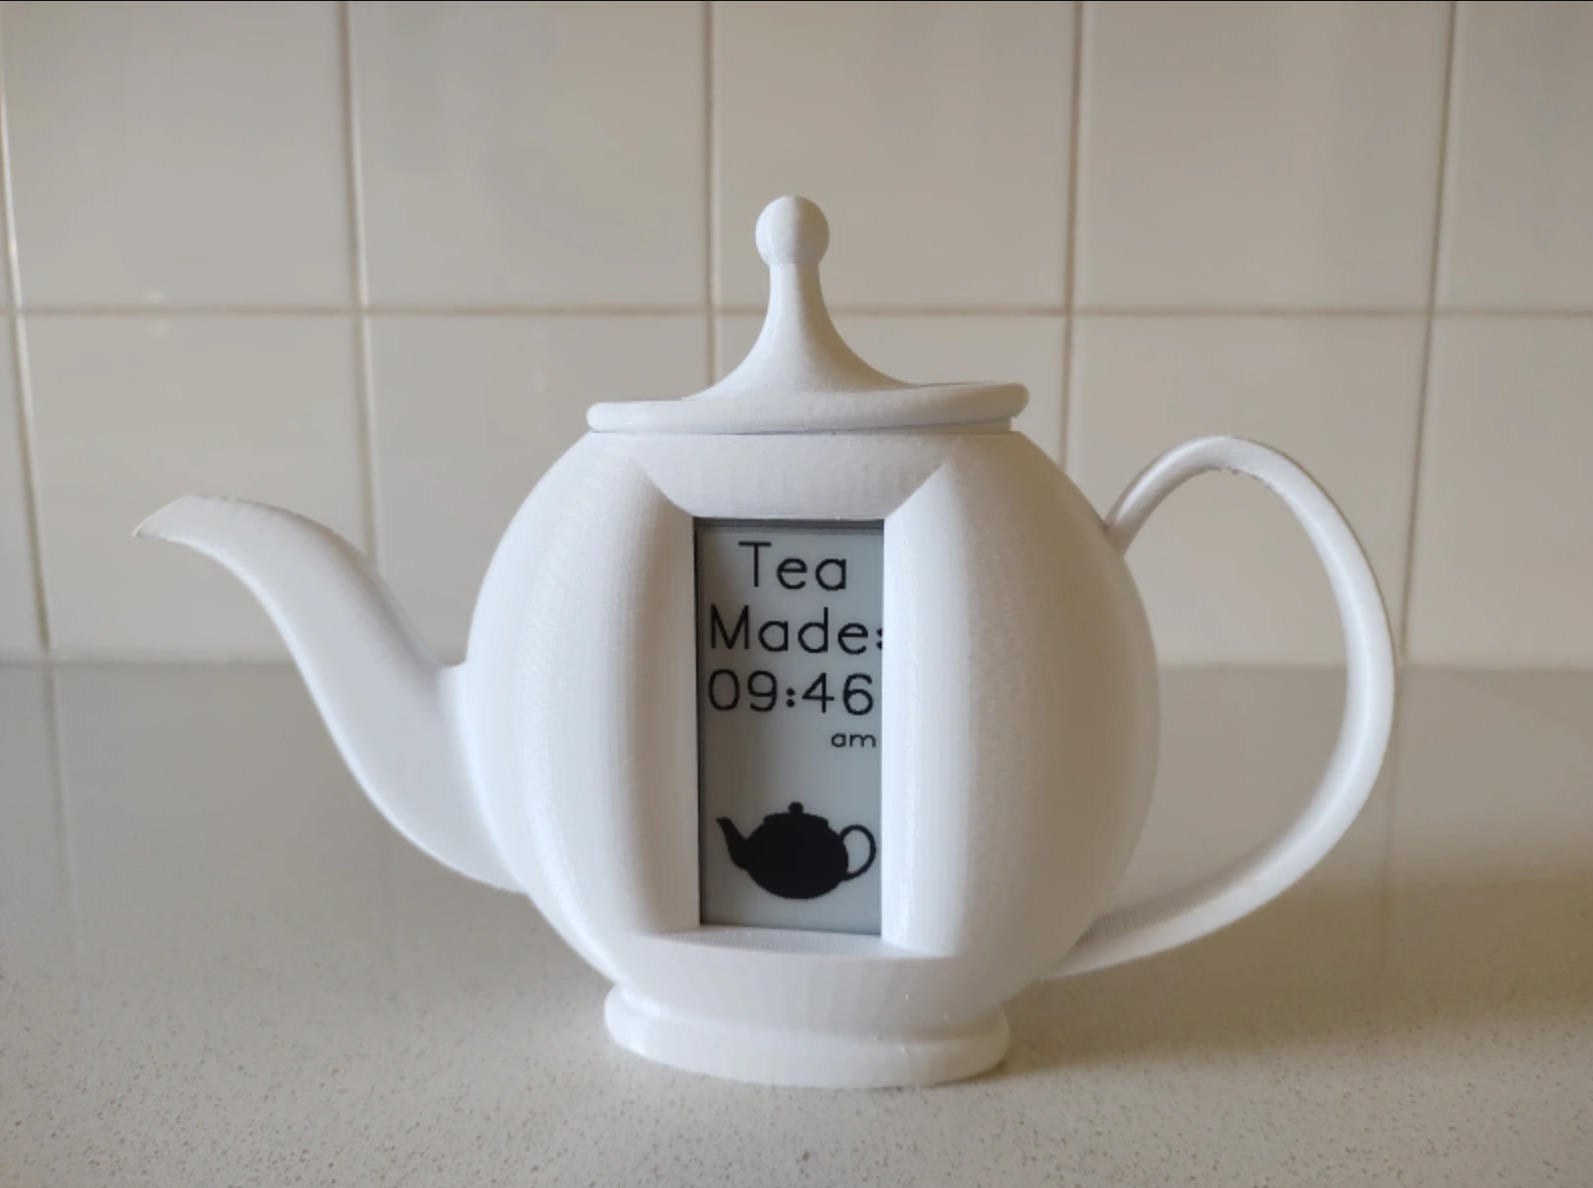 An E Ink tea timer for brewing the perfect tea